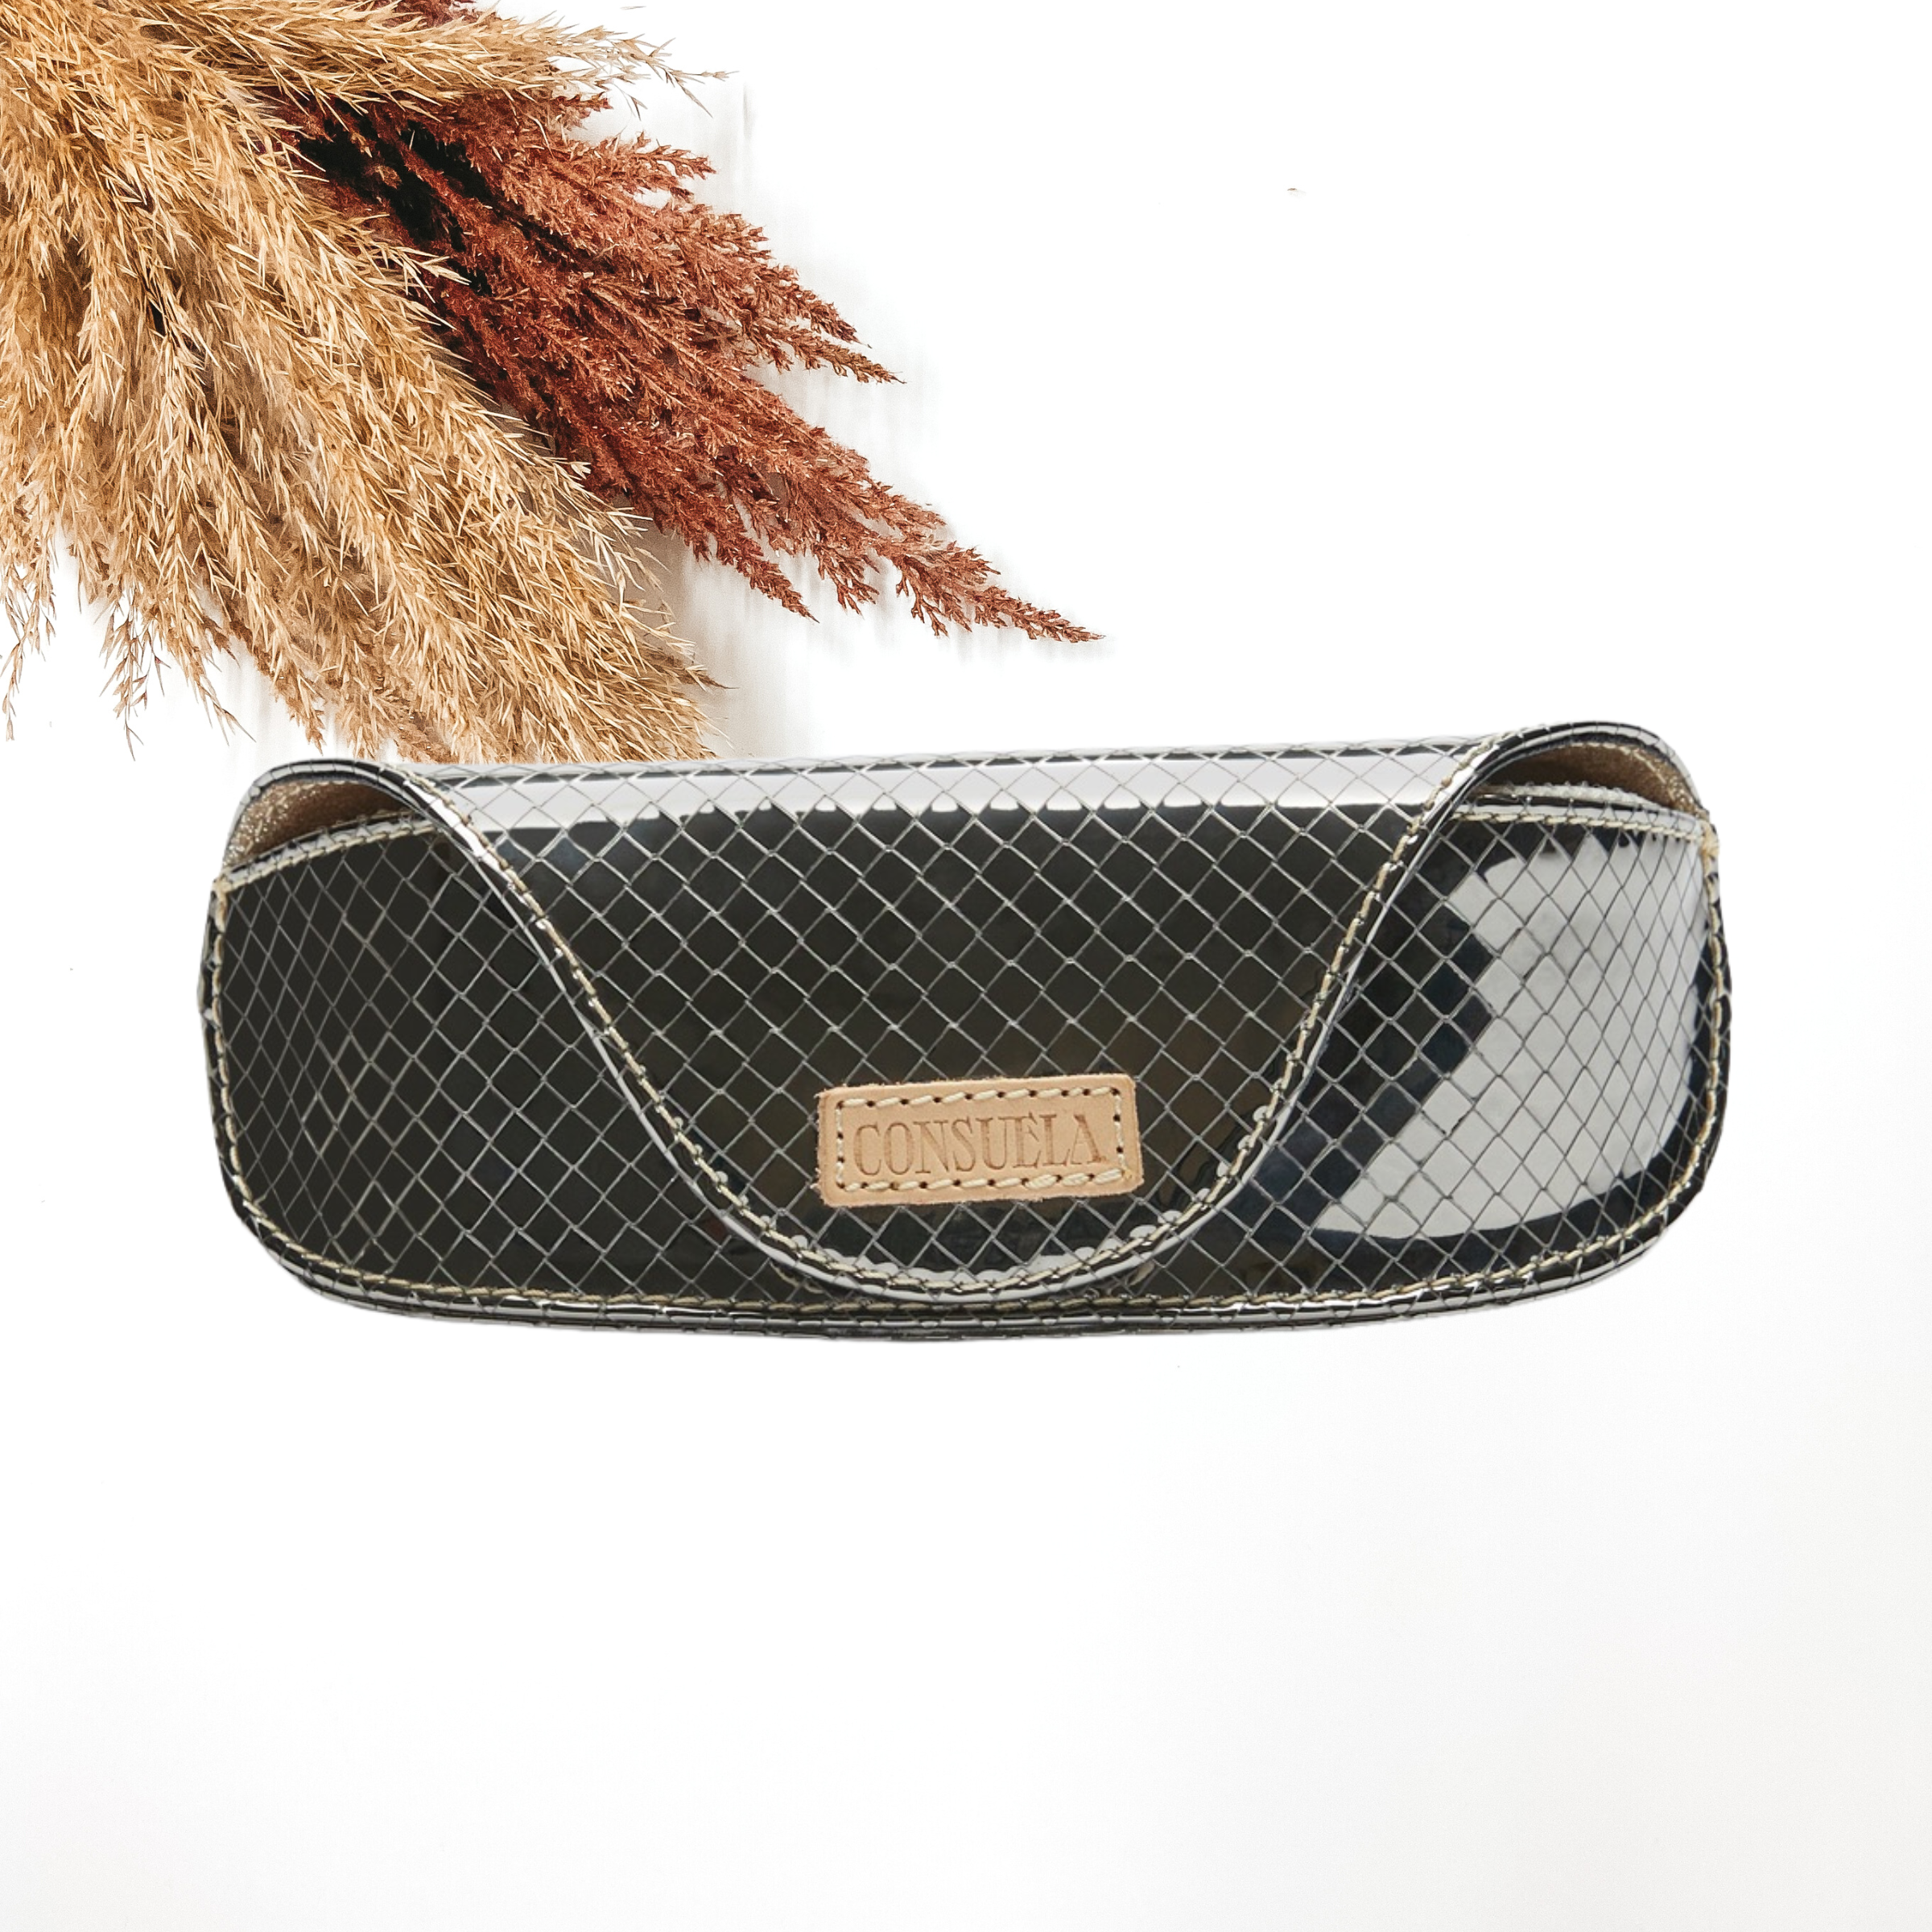 Pictured is a rectangle wallet that has a metallic silver color with a square woven pattern. This case is pictured on a white background with pompous grass in the top left corner. 